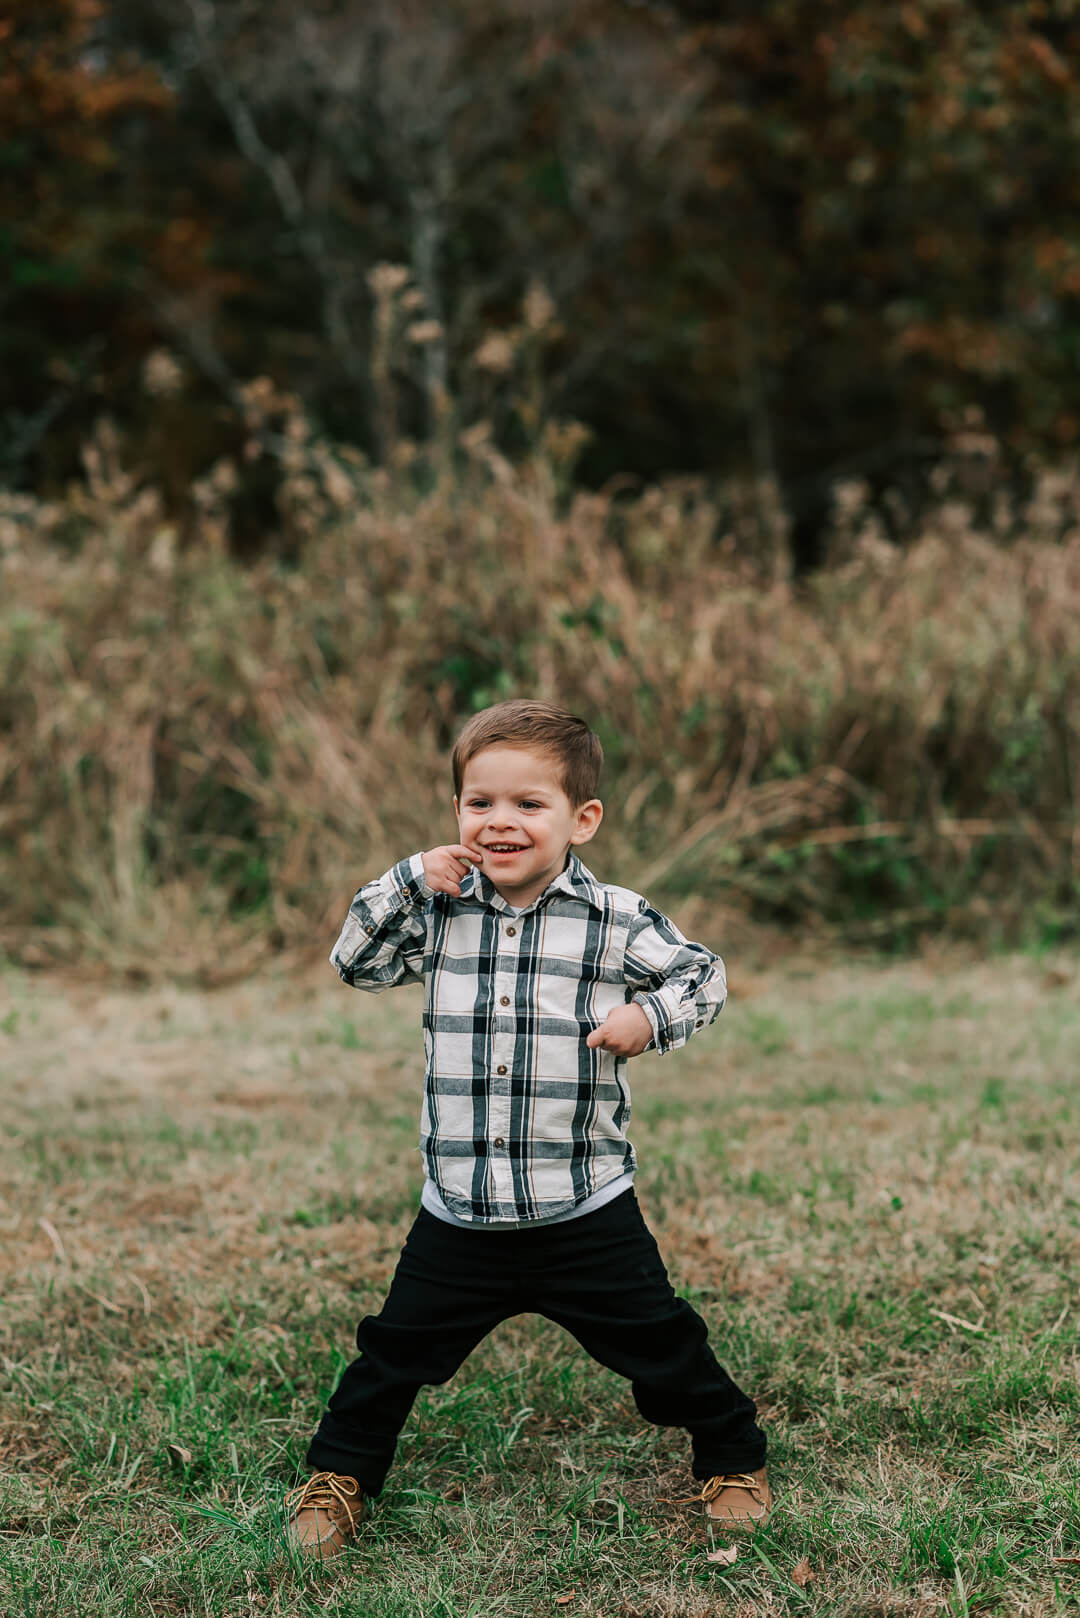 A young toddler boy in a plaid shirt plays in a clemyjontri park field